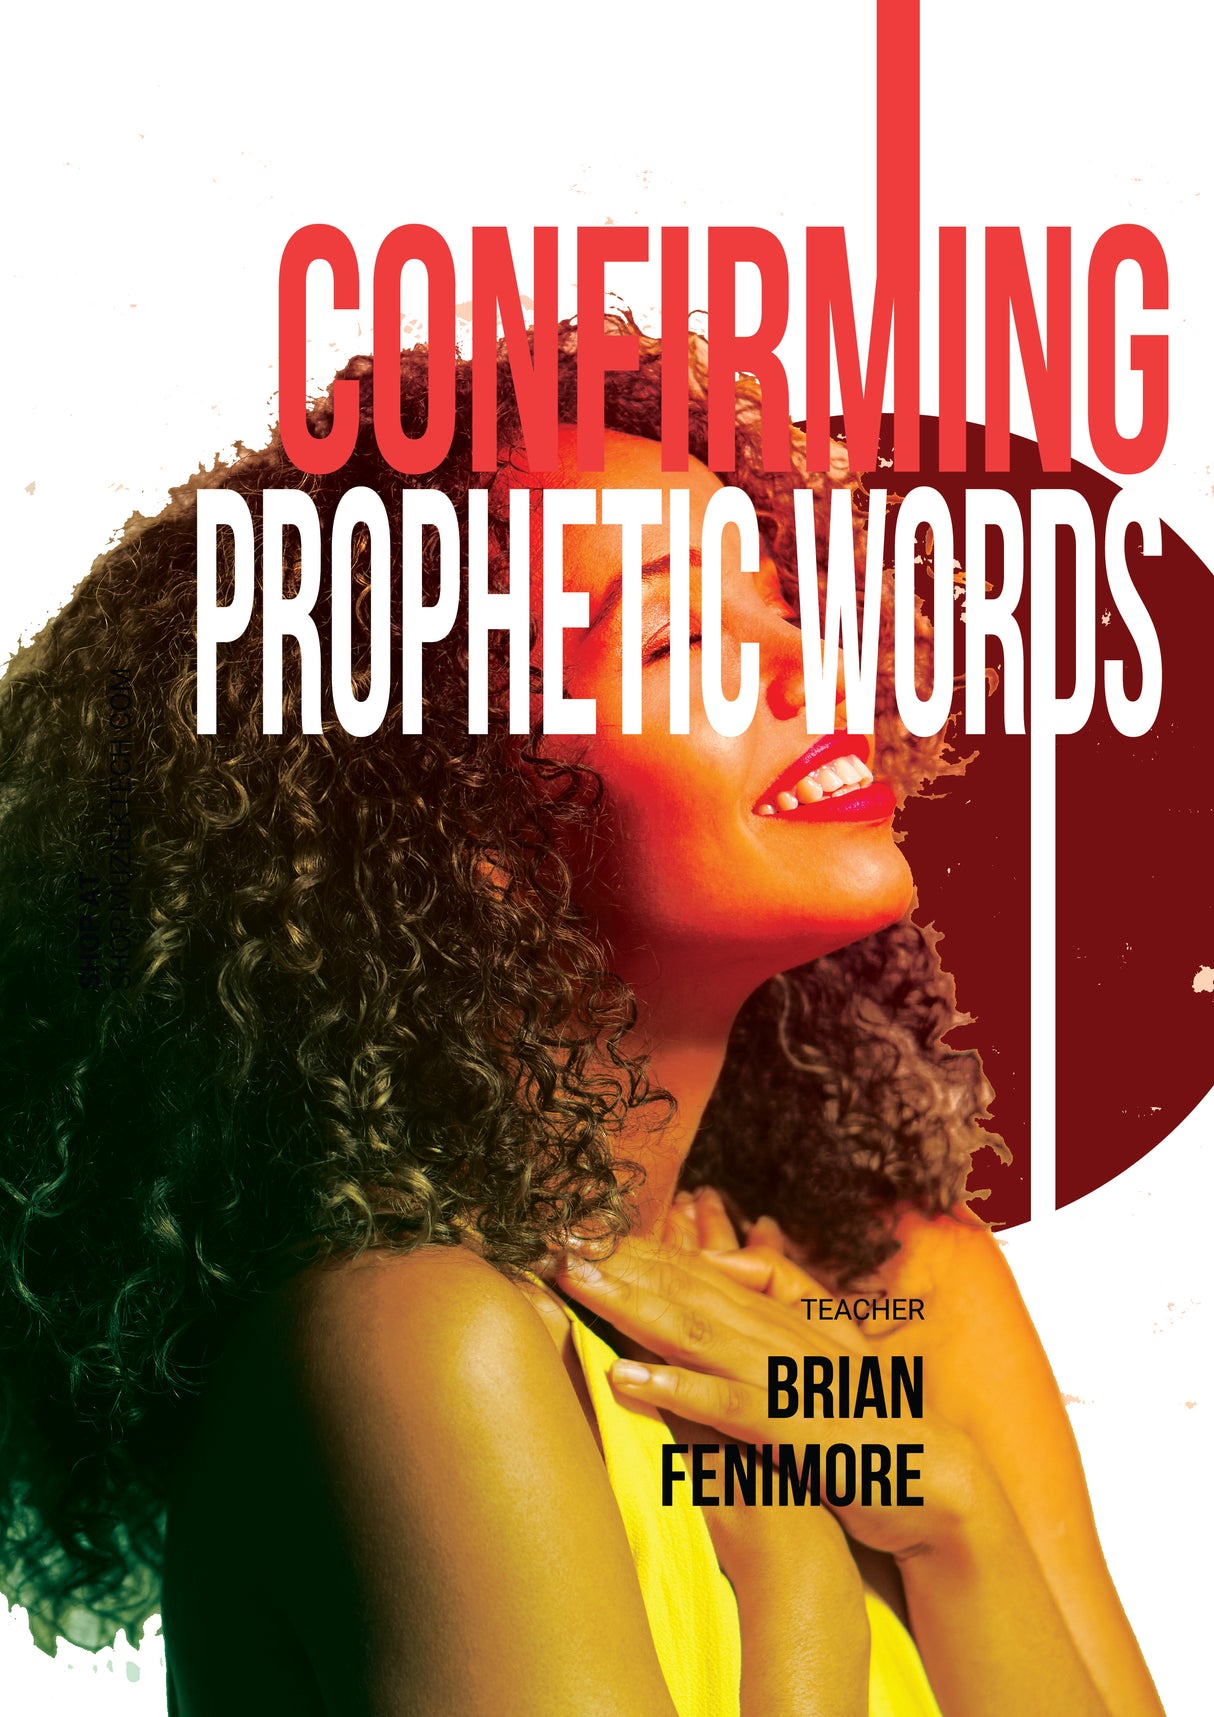 Confirming the Prophetic Word - Plumbline Store